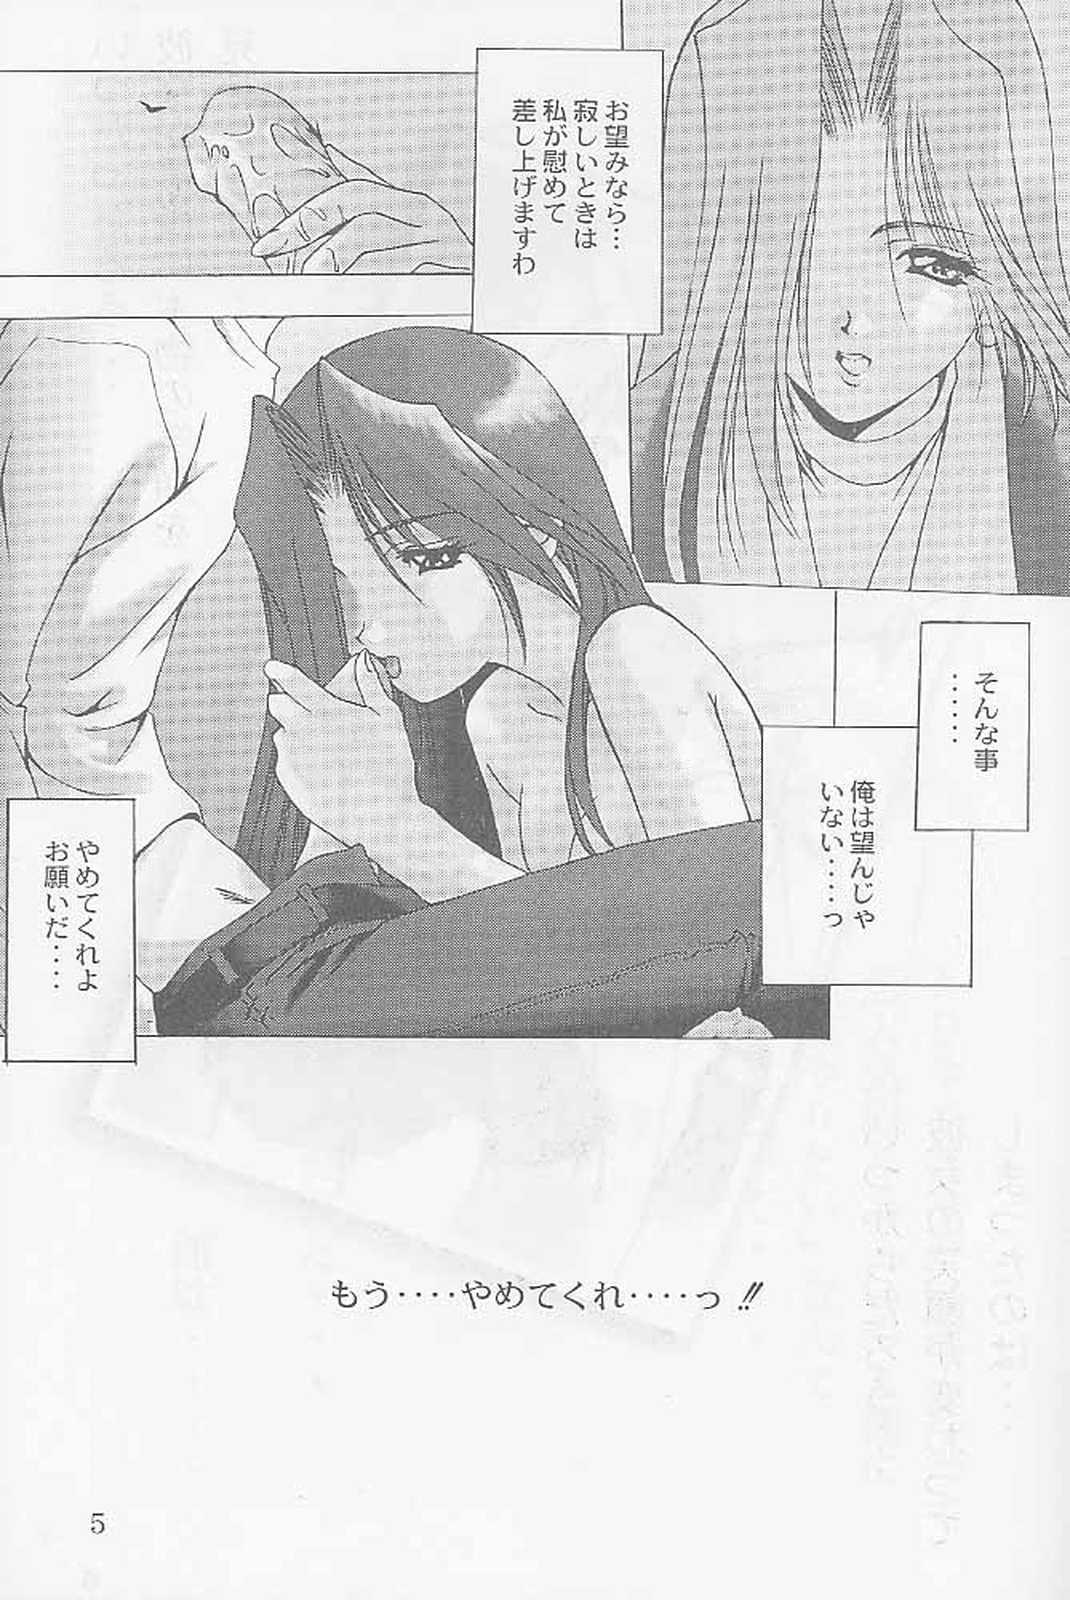 Soft First Single ～Christmas night angel～ - White album Plumper - Page 4